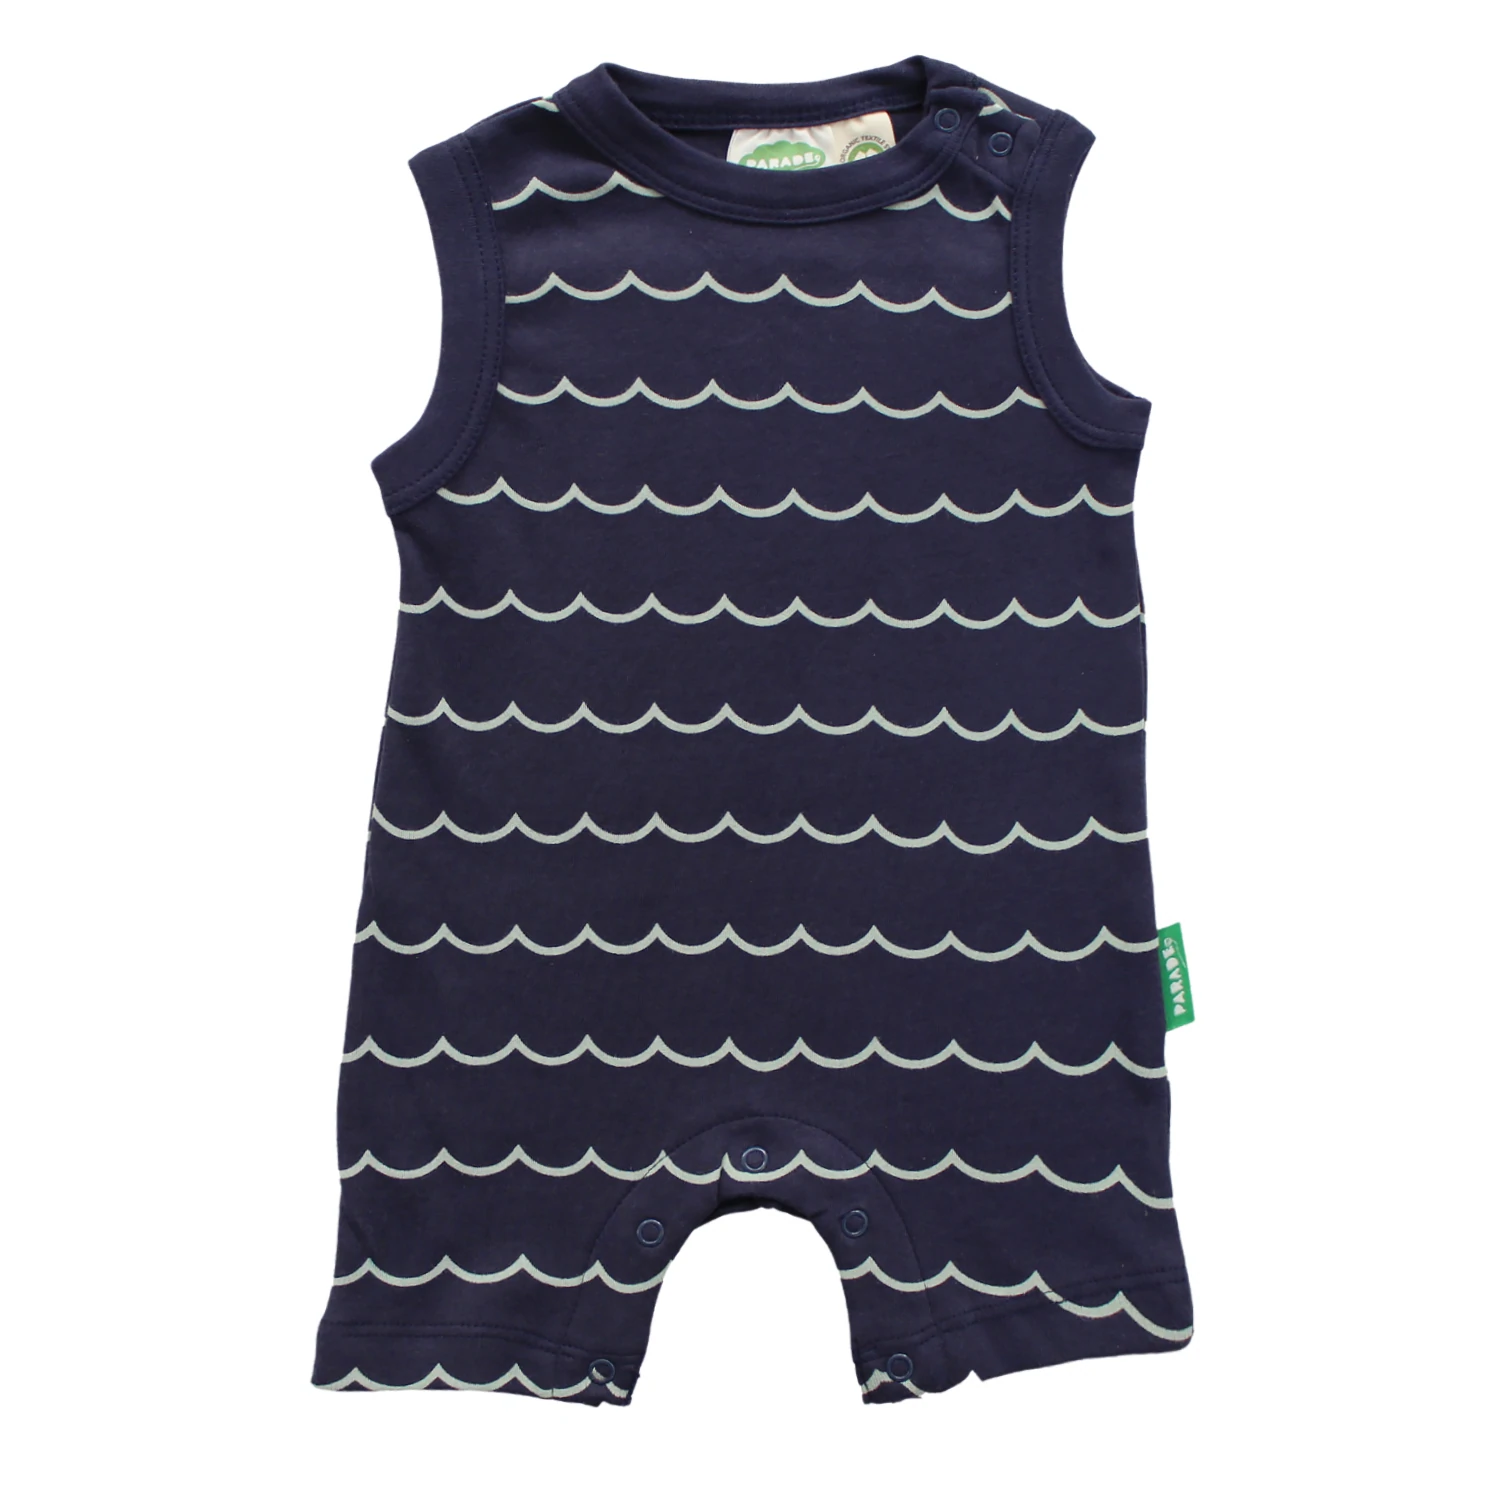 Parade Organics organic cotton tank romper for infants and toddlers